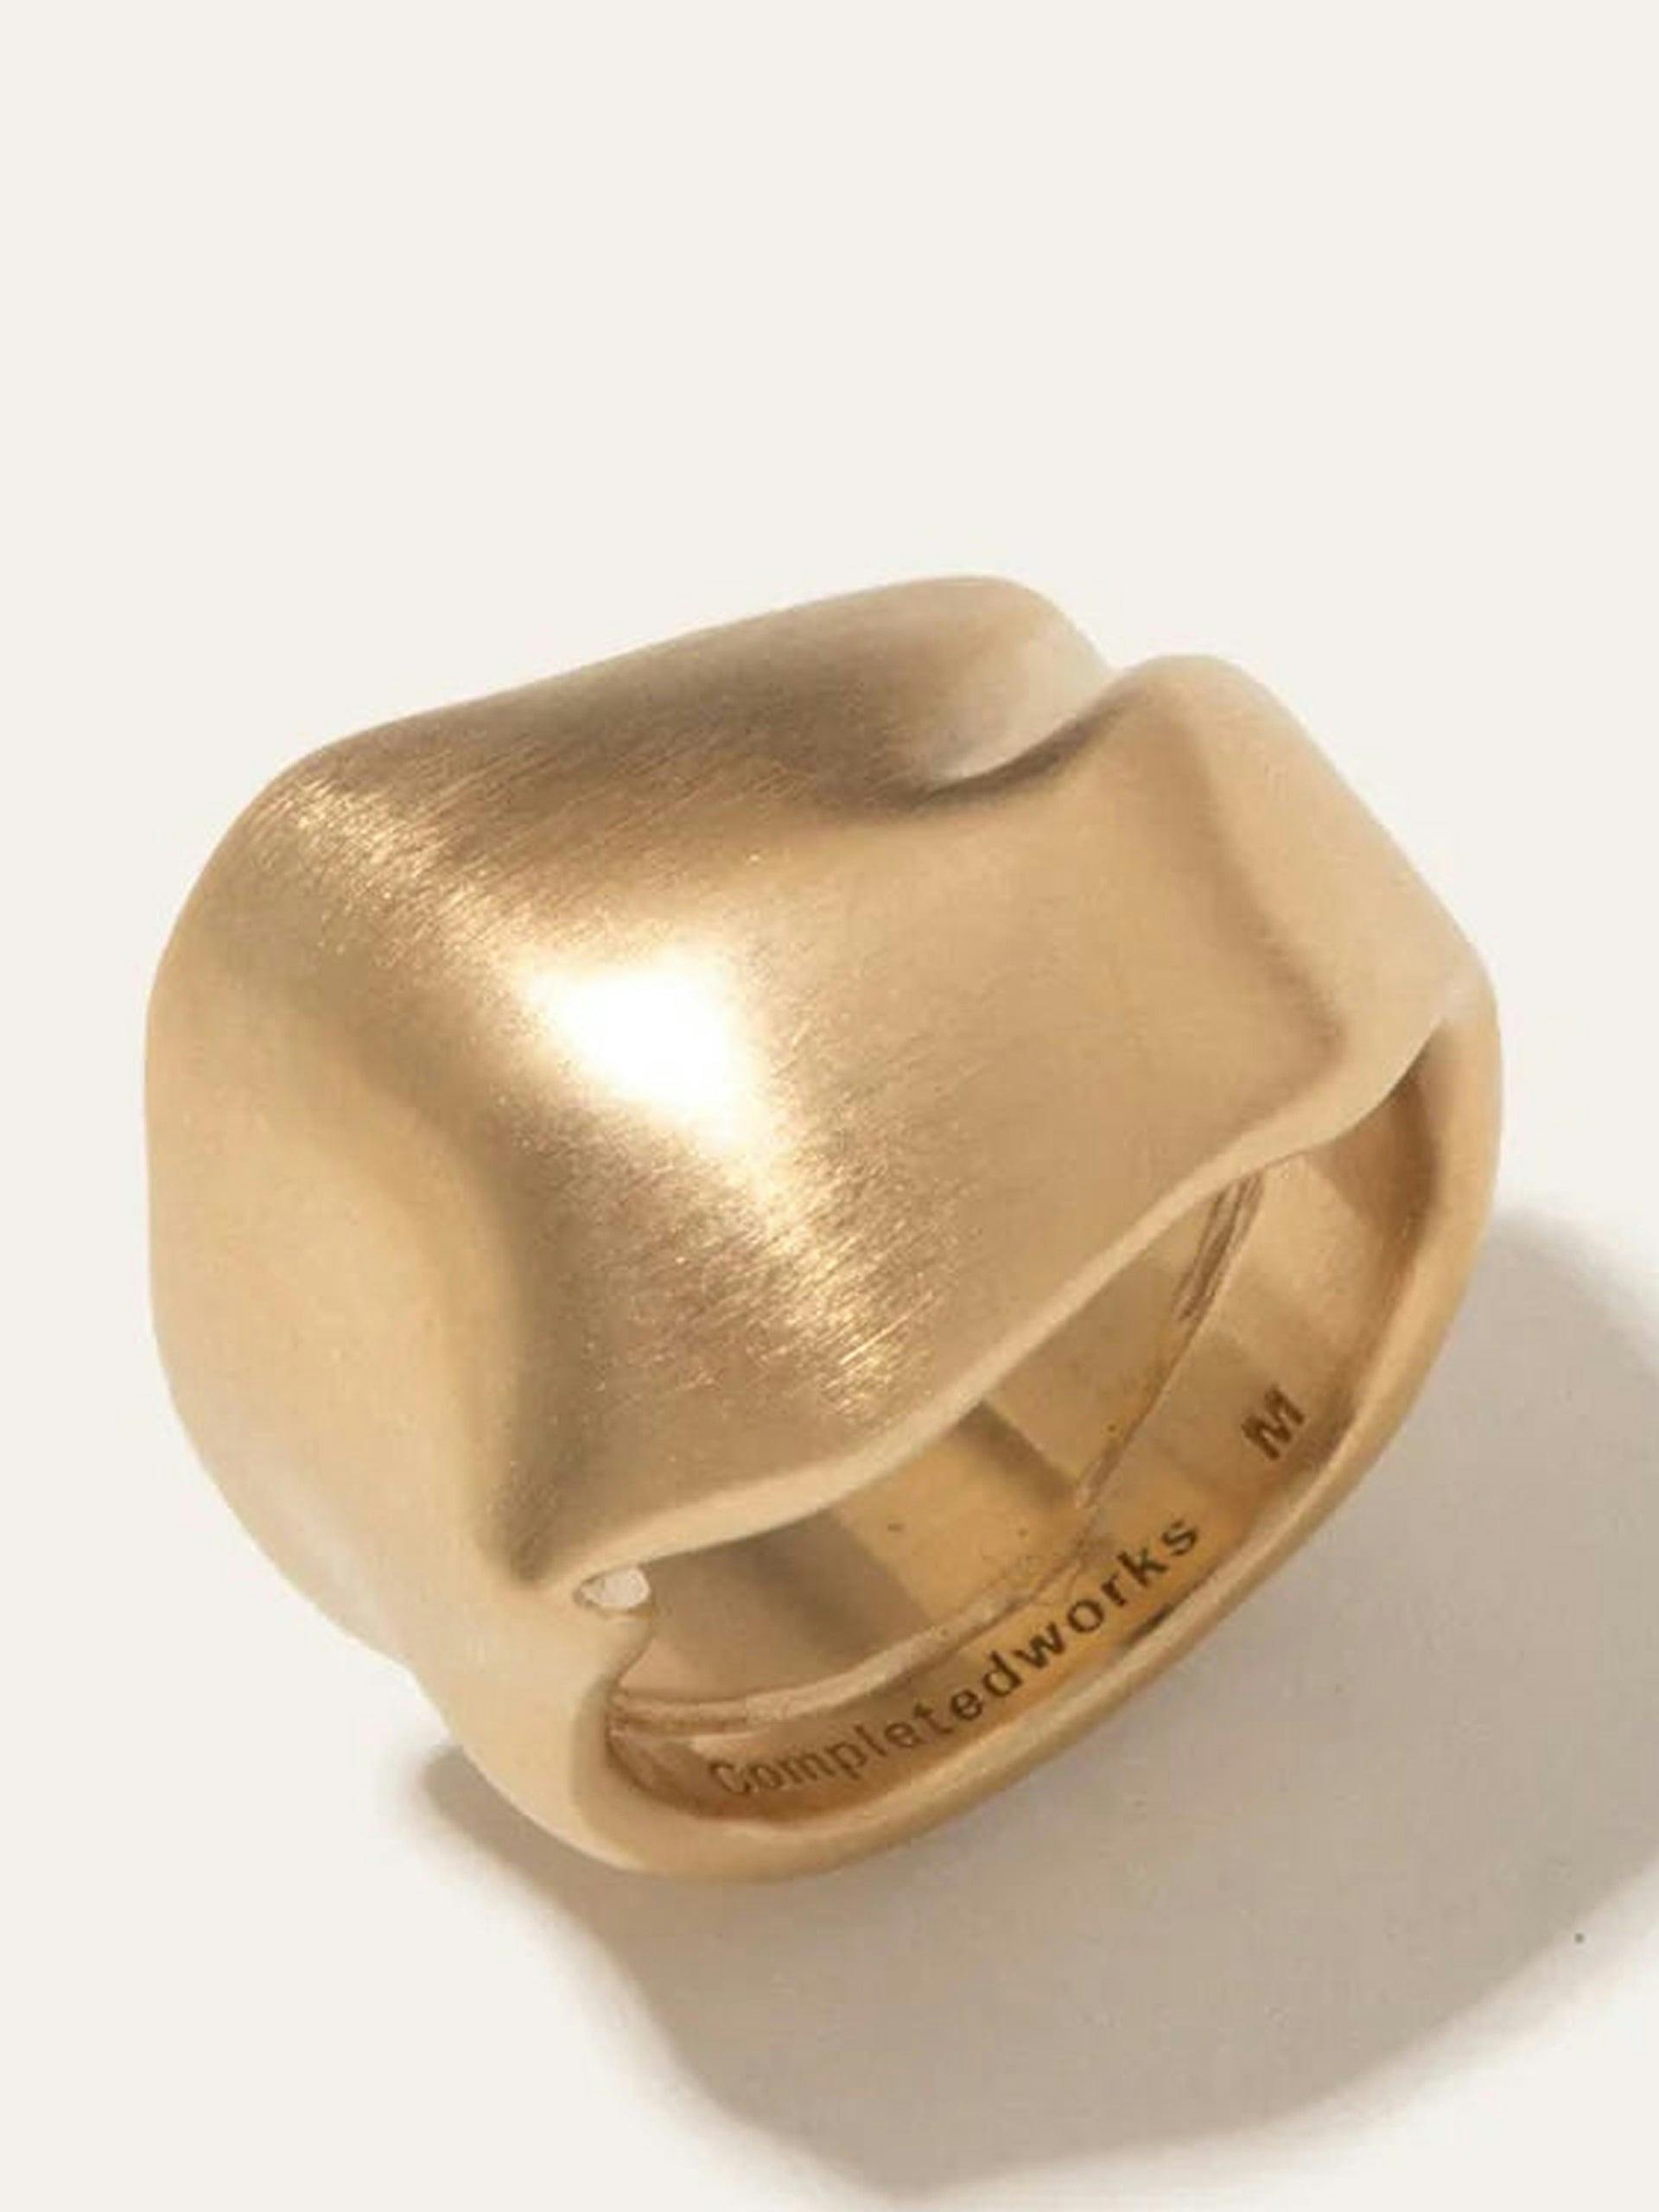 "The Best Place to be a Puffin" gold vermeil ring